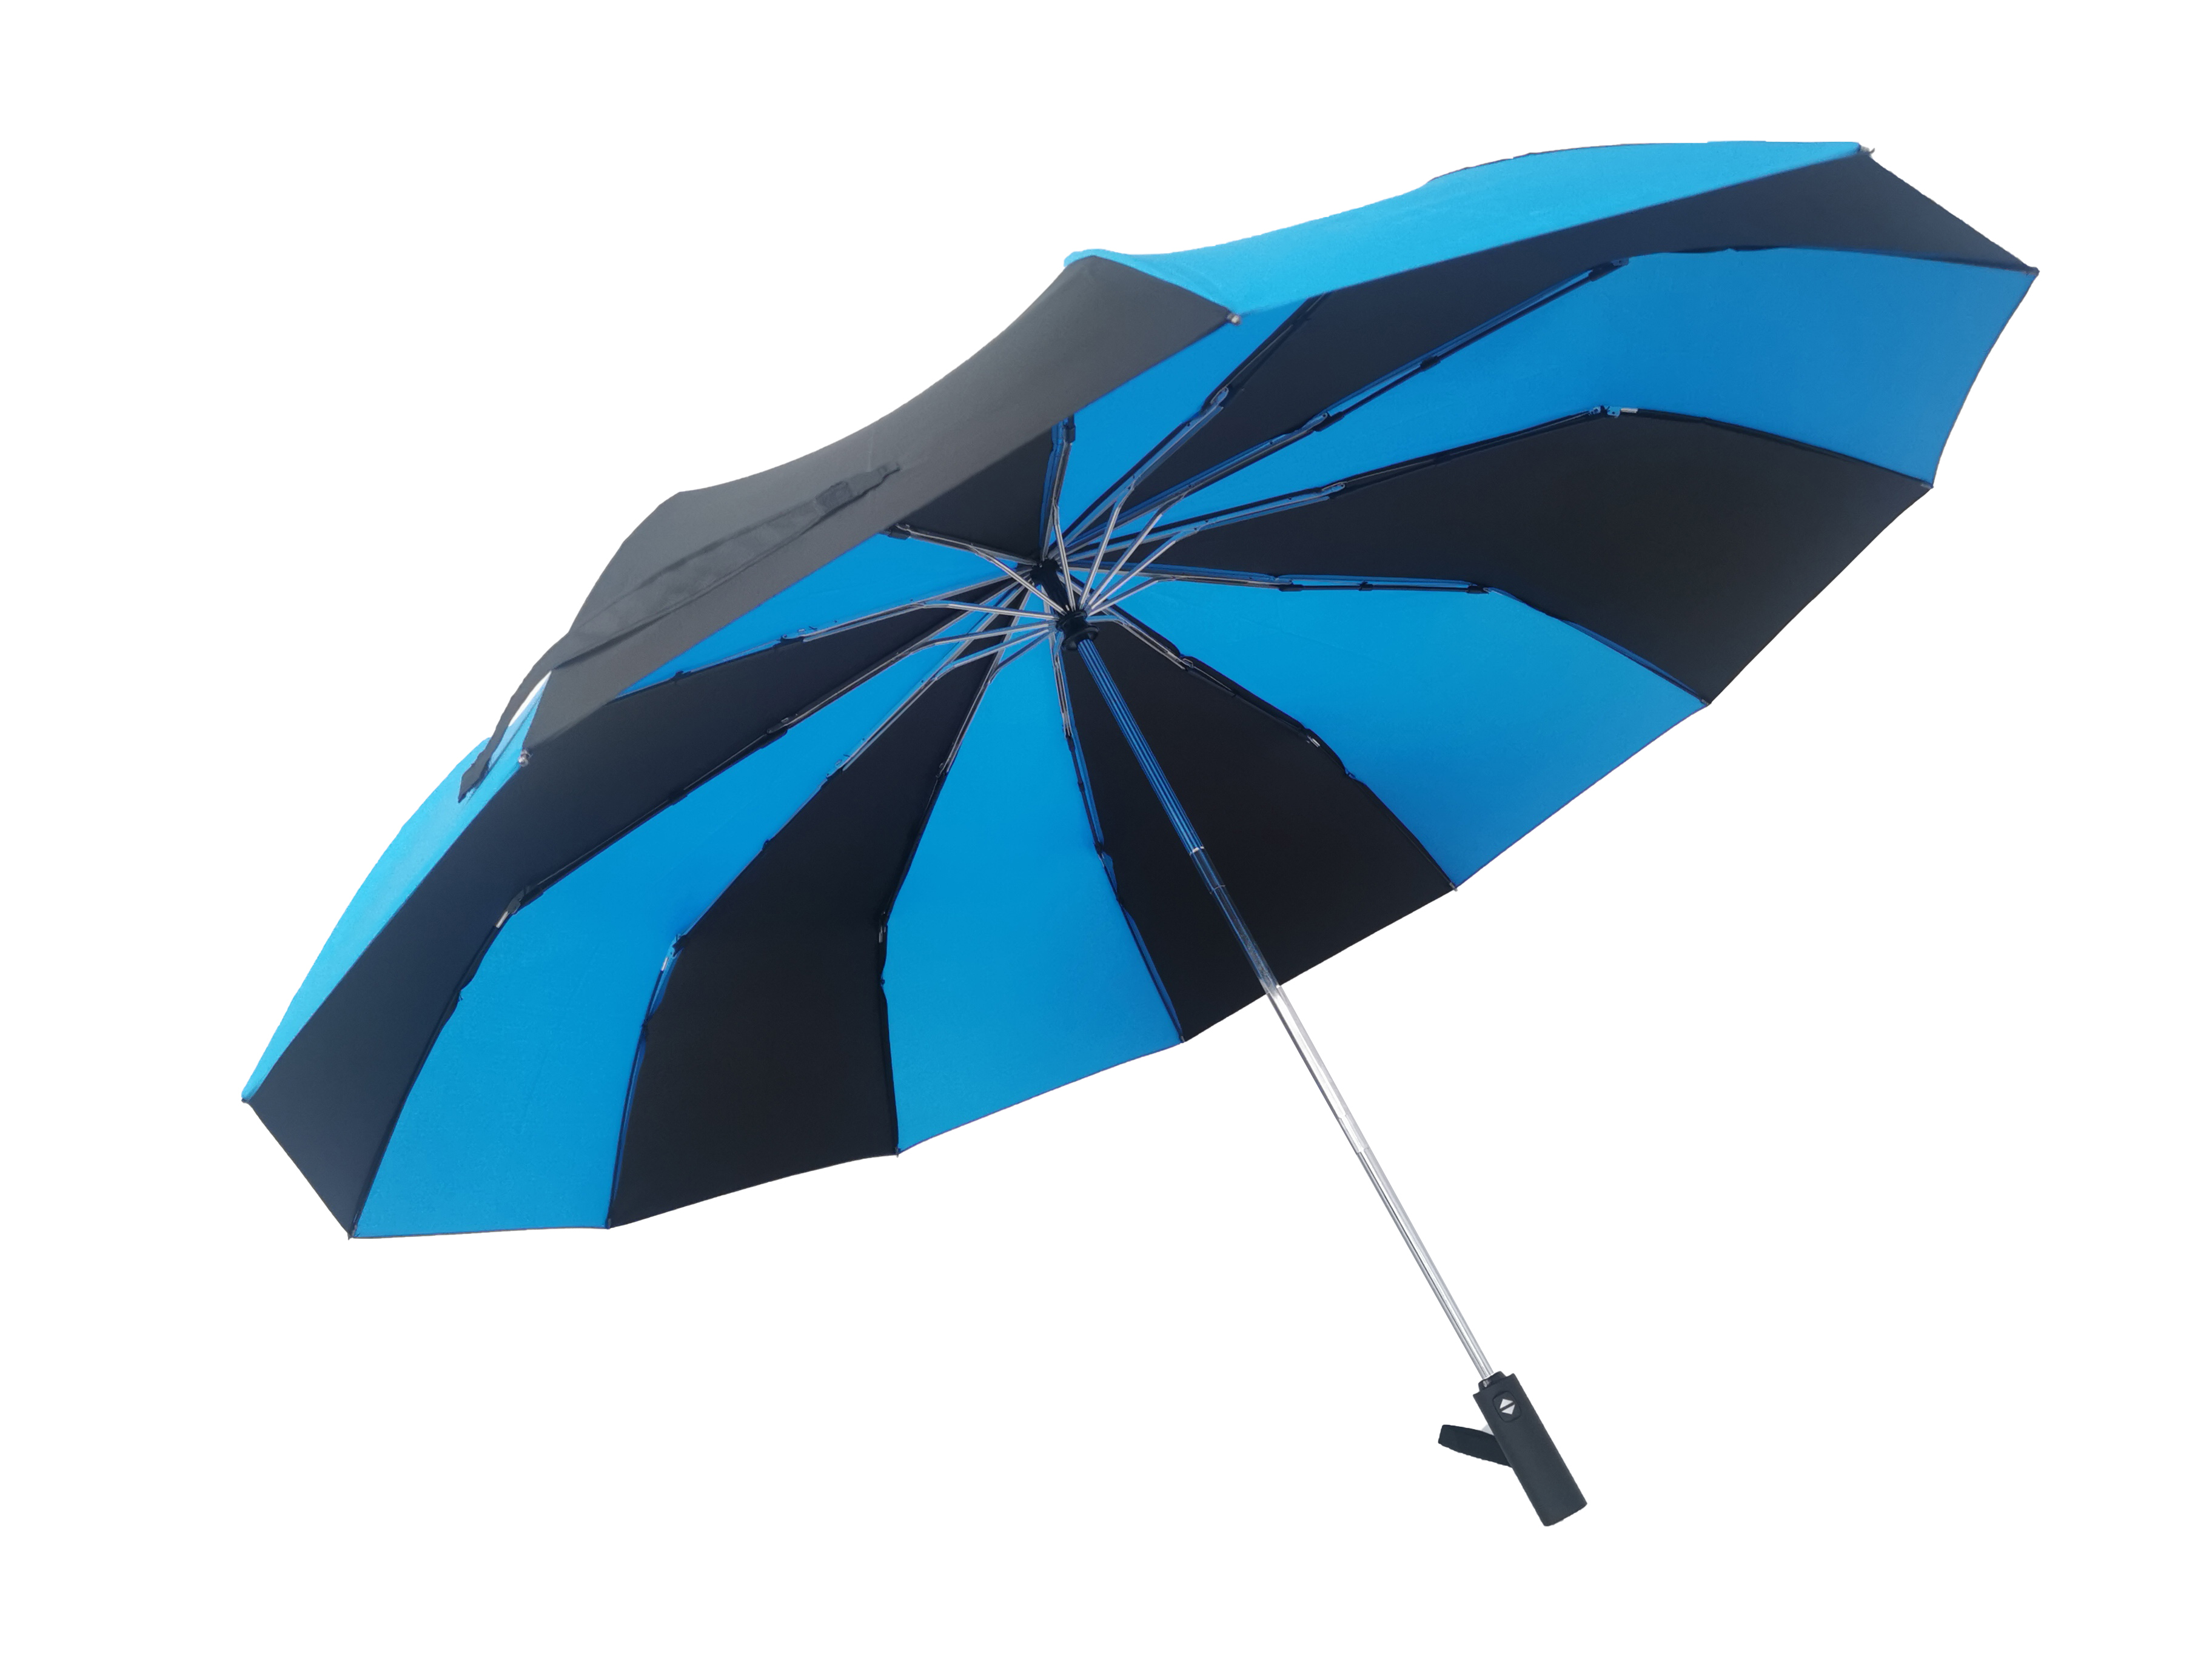 https://www.hodaumbrella.com/big-size-umbrella-covers-your-family-your-friends-portable-size-for-travel-product/